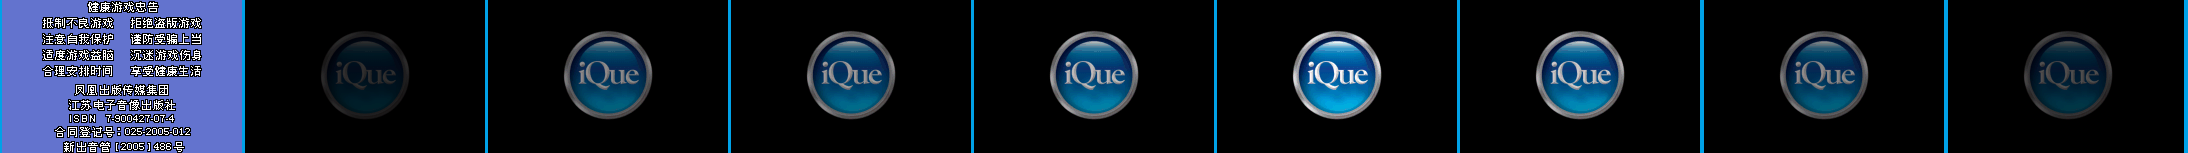 Healthy Game Advice+Ique logo